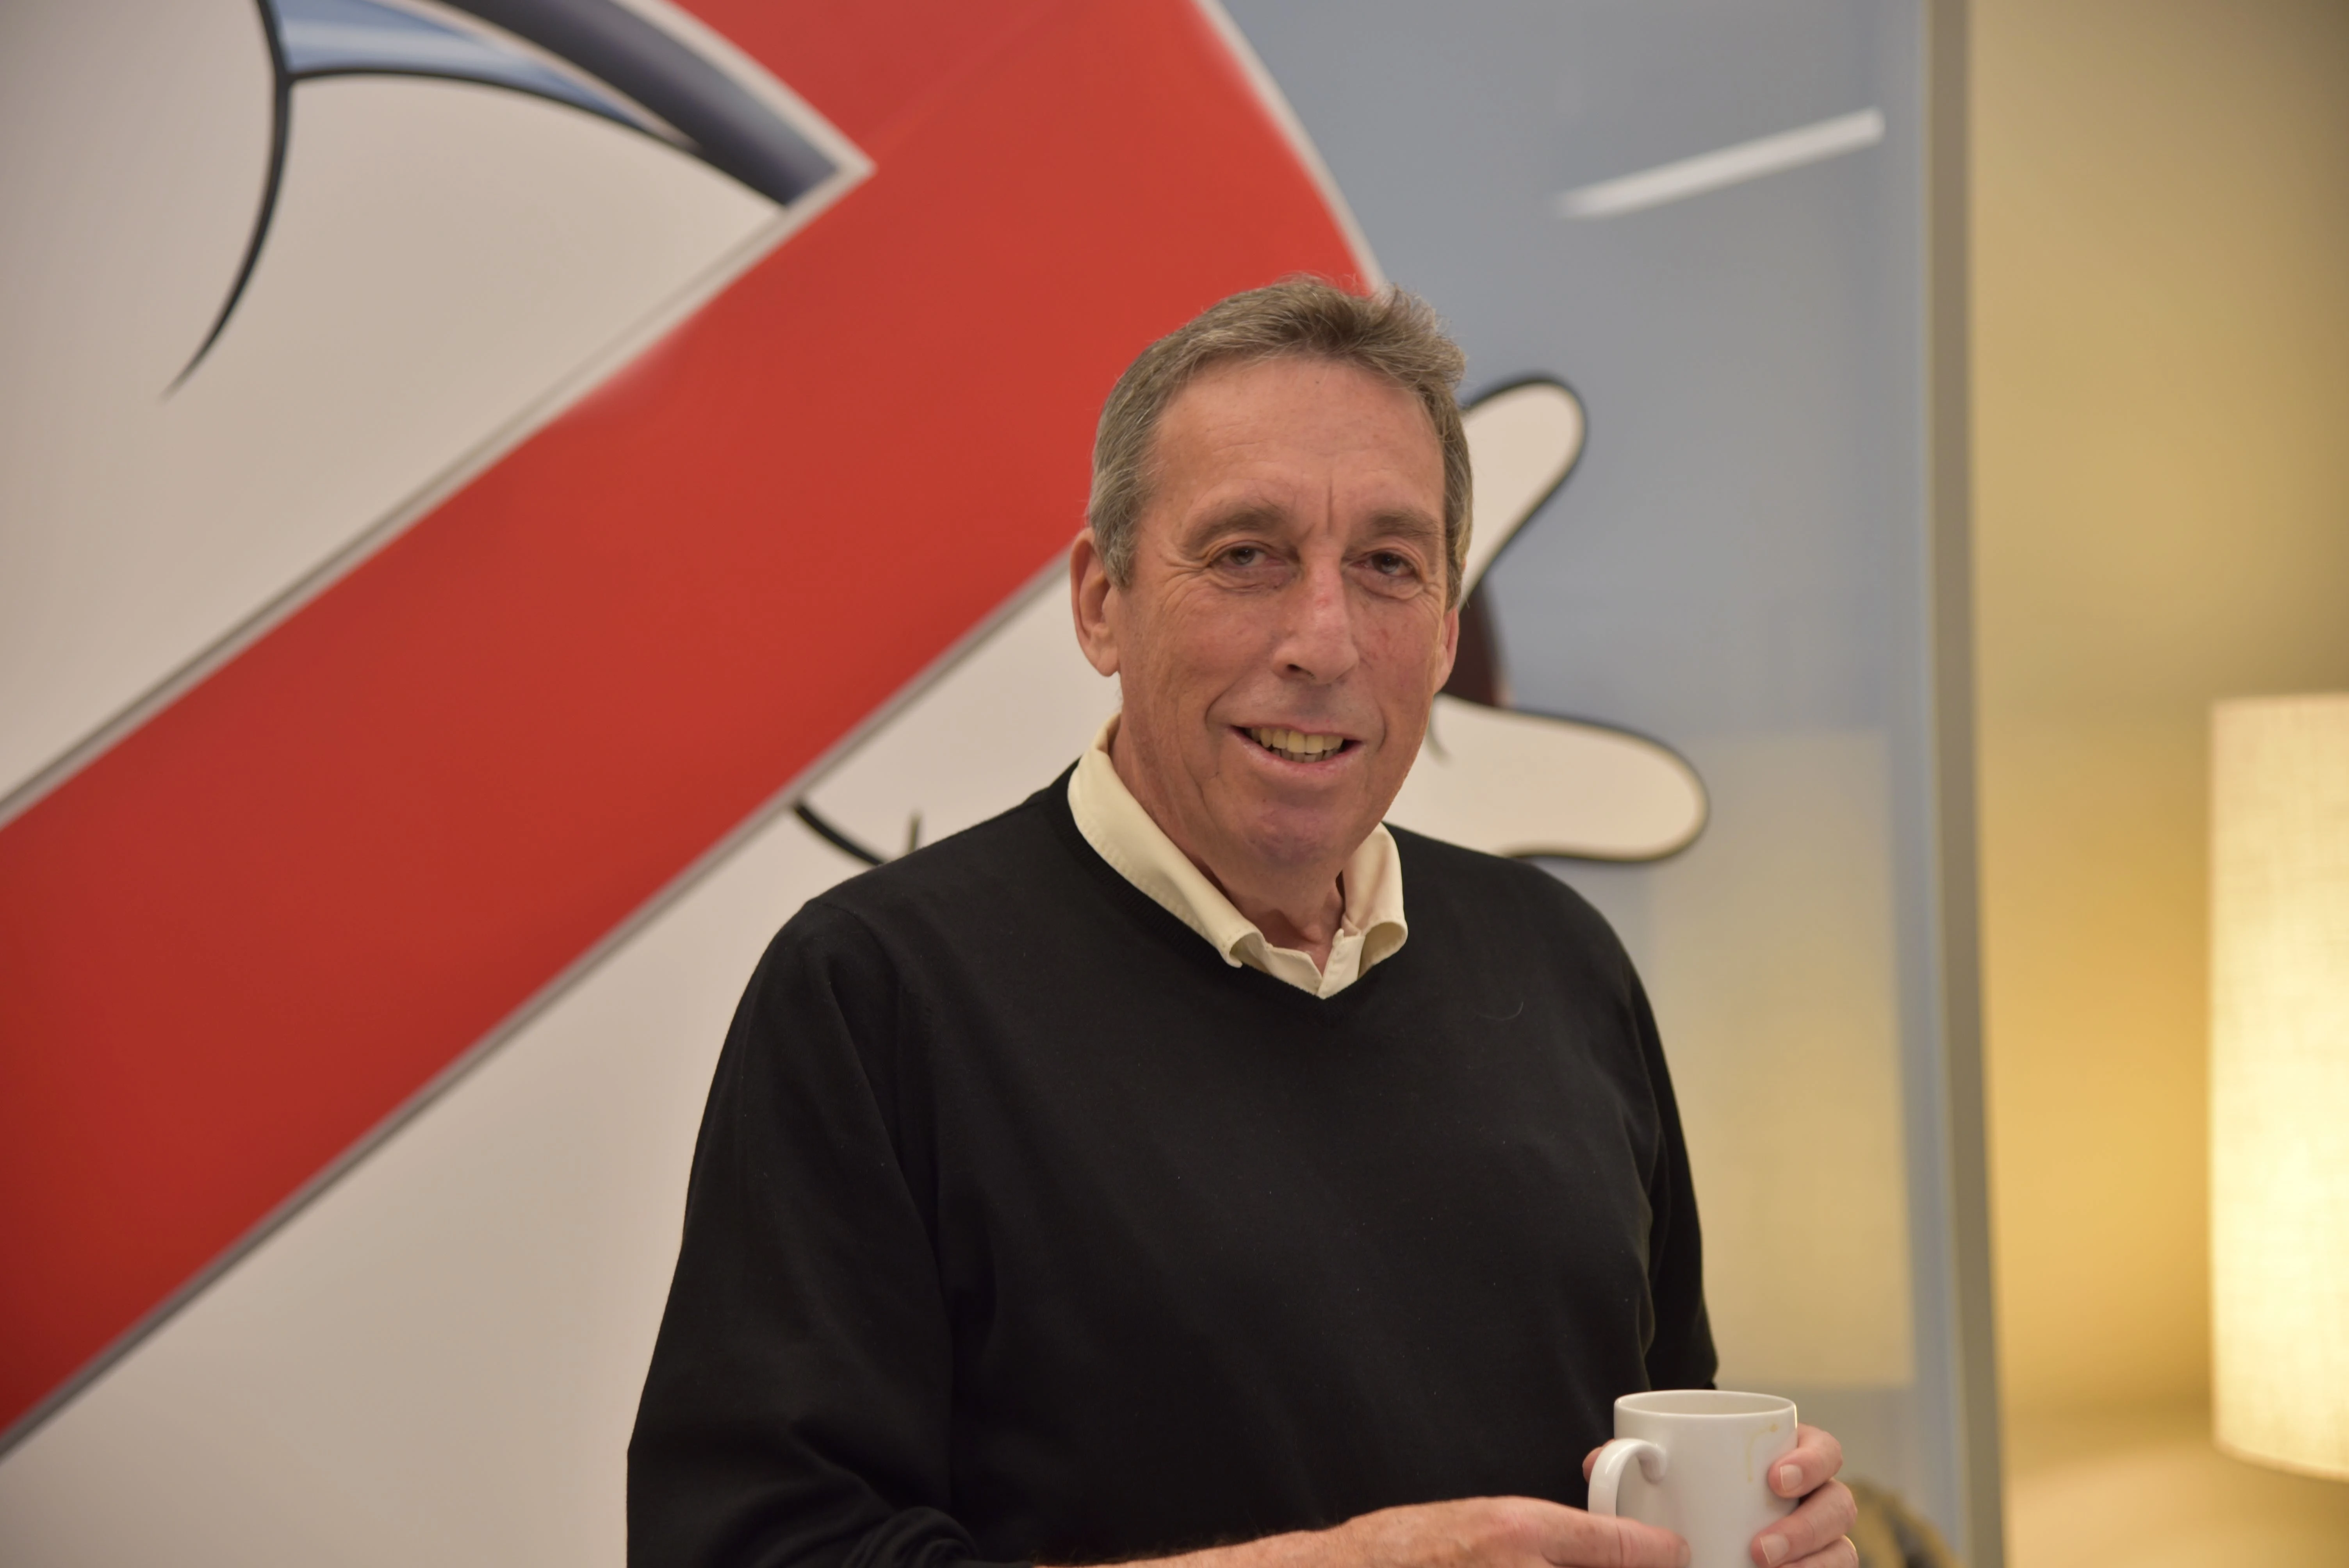 Ivan Reitman at Ghost Corps at Sony Pictures Studio in Culver City, CA